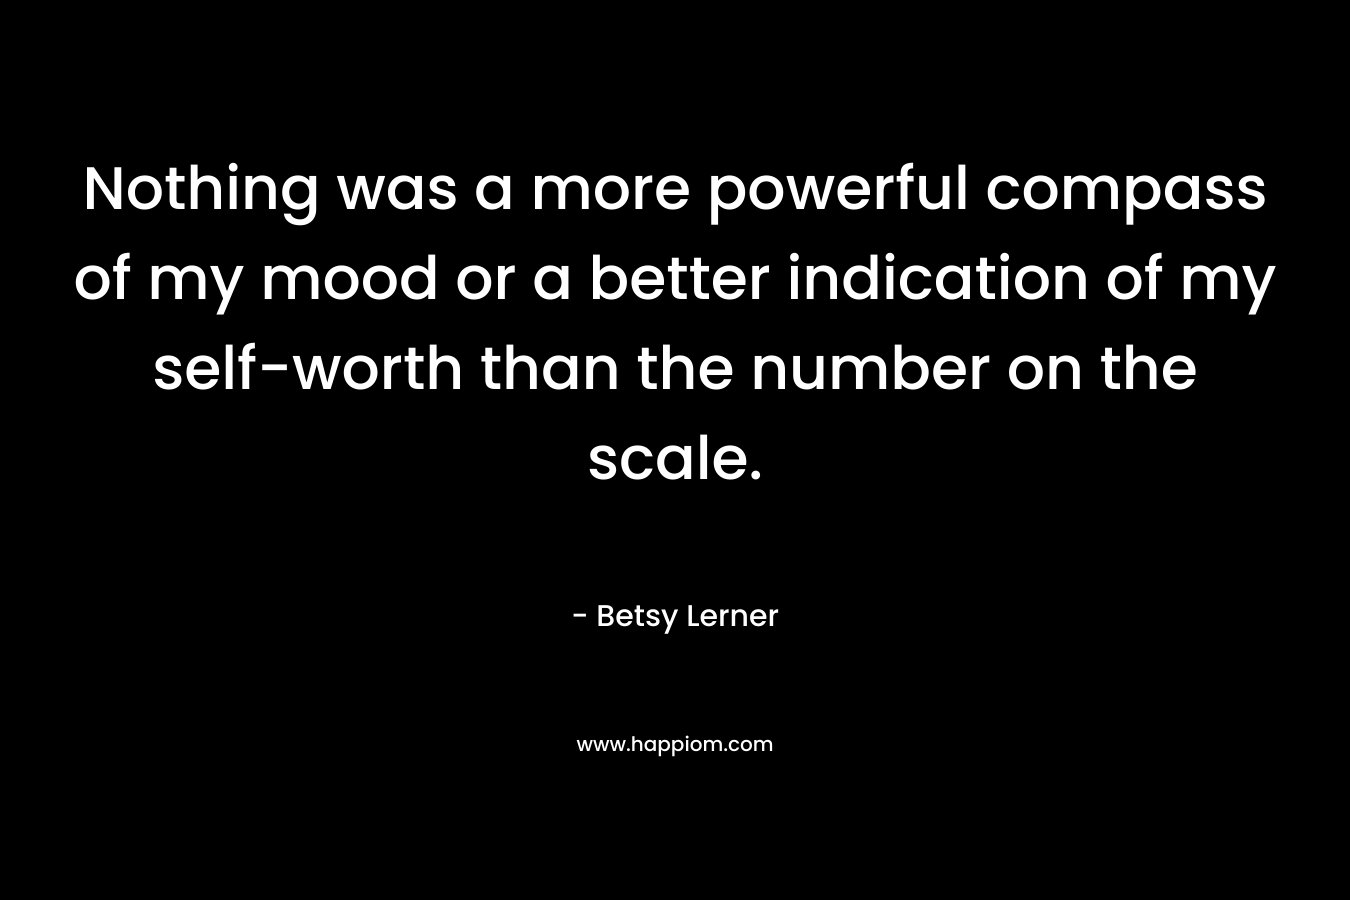 Nothing was a more powerful compass of my mood or a better indication of my self-worth than the number on the scale. – Betsy Lerner